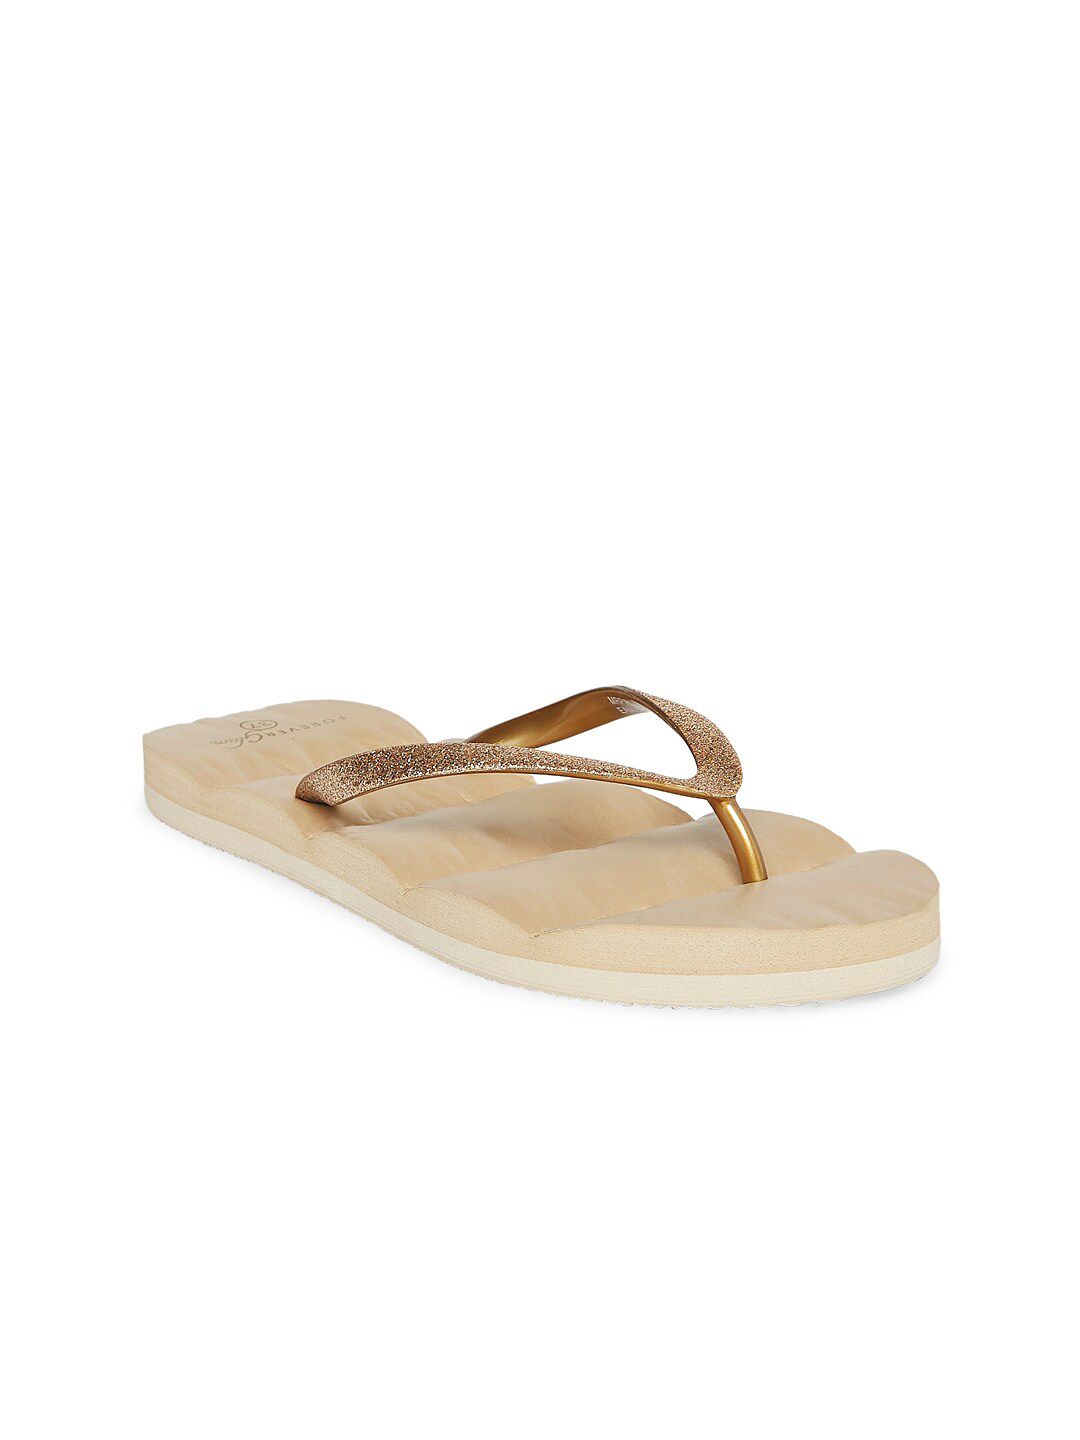 Forever Glam by Pantaloons Women Beige & Gold-Toned Thong Flip-Flops Price in India